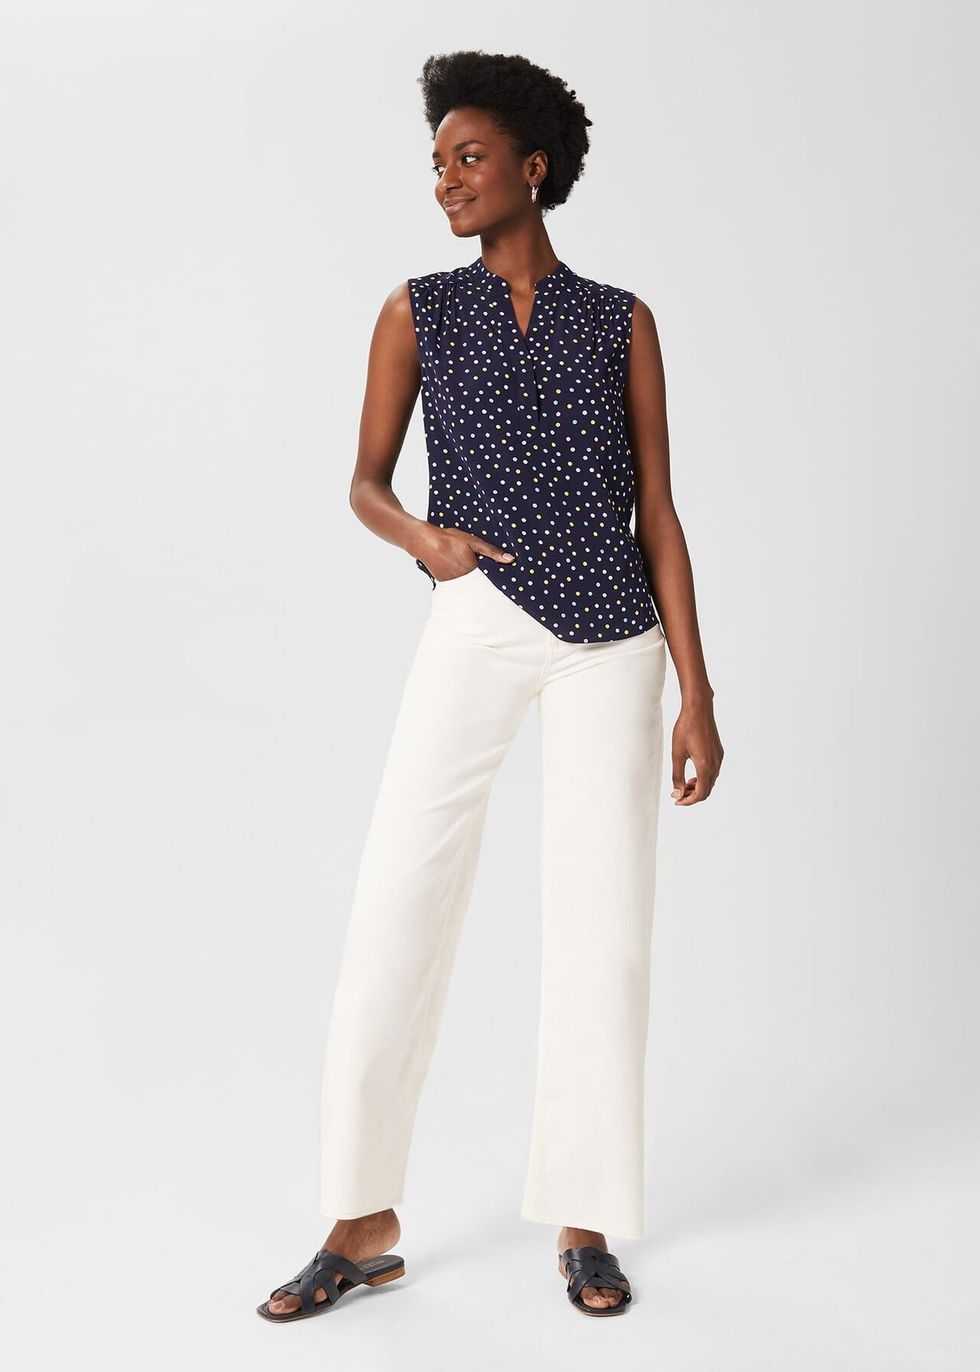 Y.A.S v neck blouse with button detail in black and white polka dot